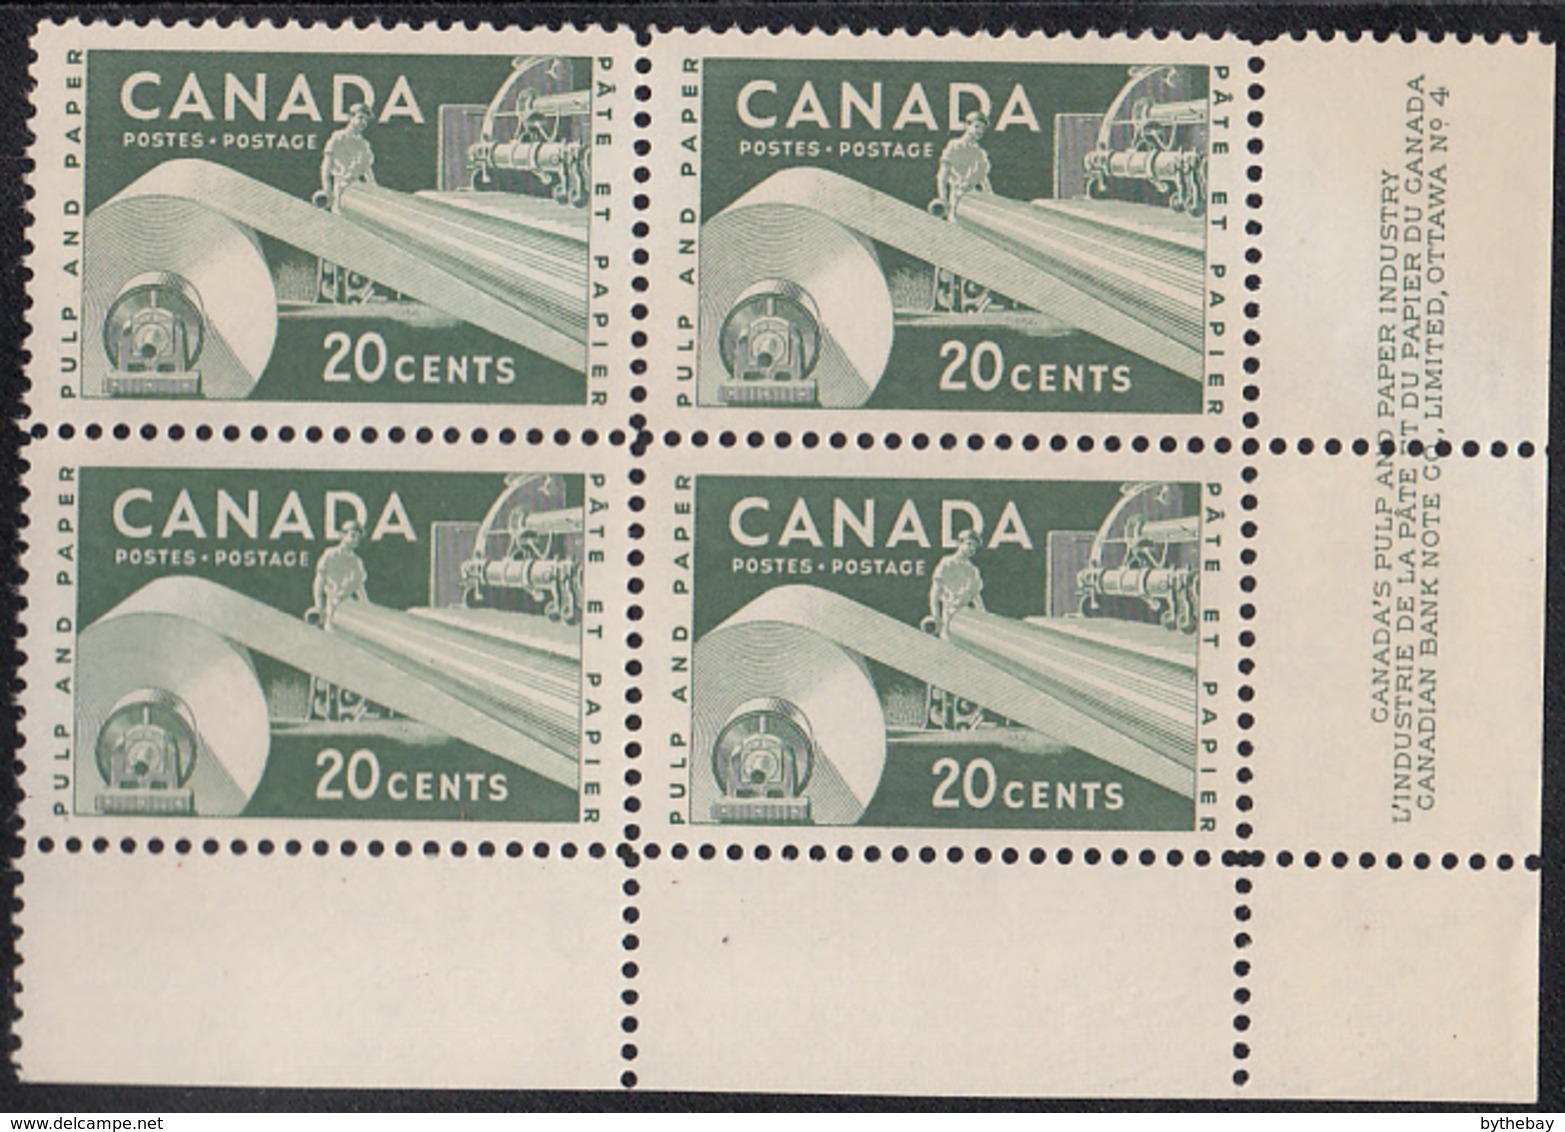 Canada 1956 MNH Sc #362 20c Paper Industry Plate #4 LR - Plate Number & Inscriptions